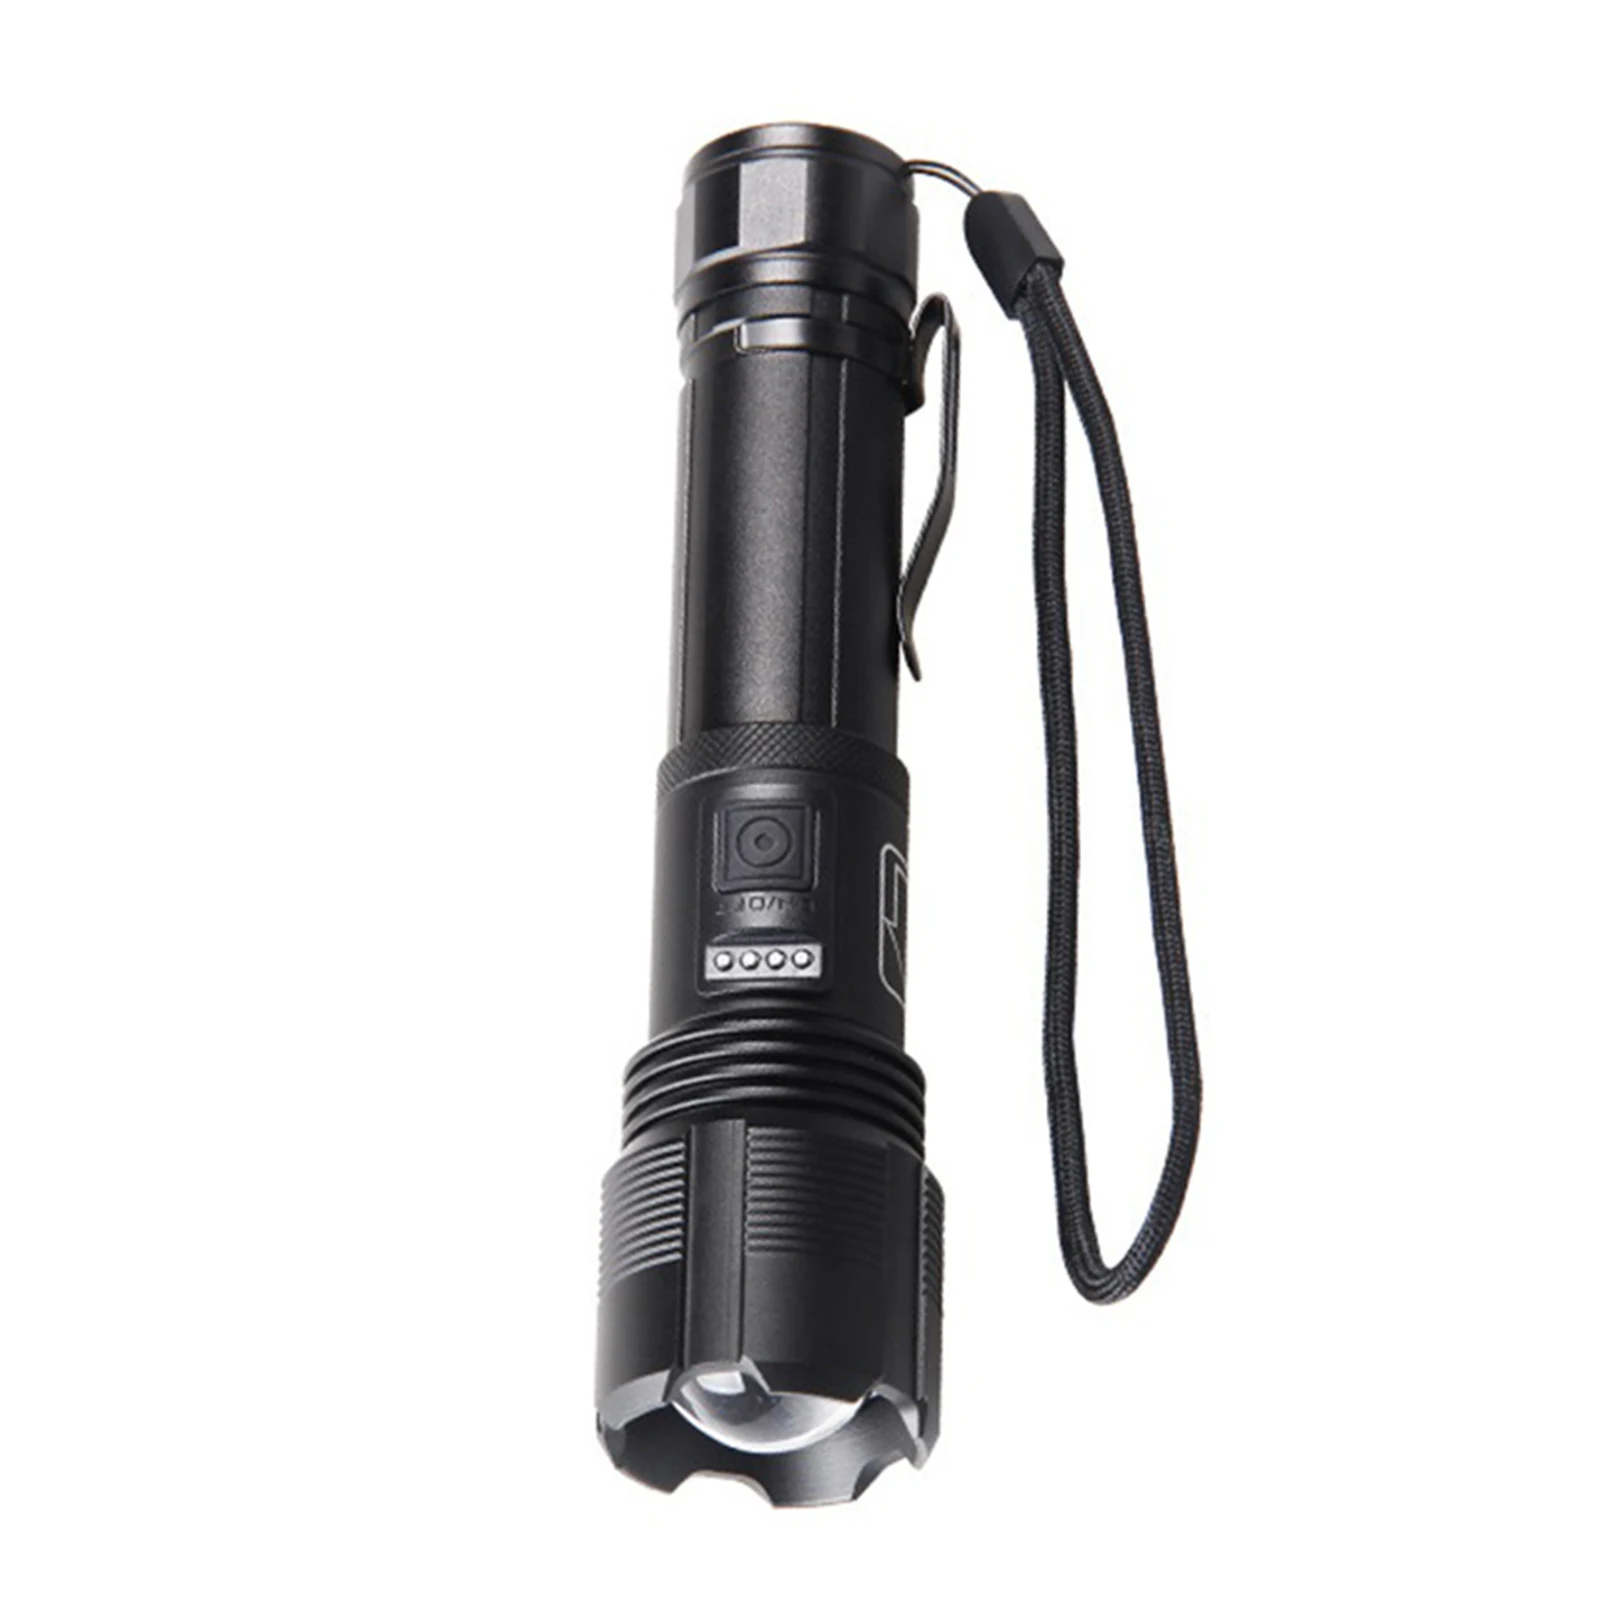 Tybe-C USB Rechargeable Flashlight with Power Display Aluminum Alloy Shell Design for Camping Hiking Running